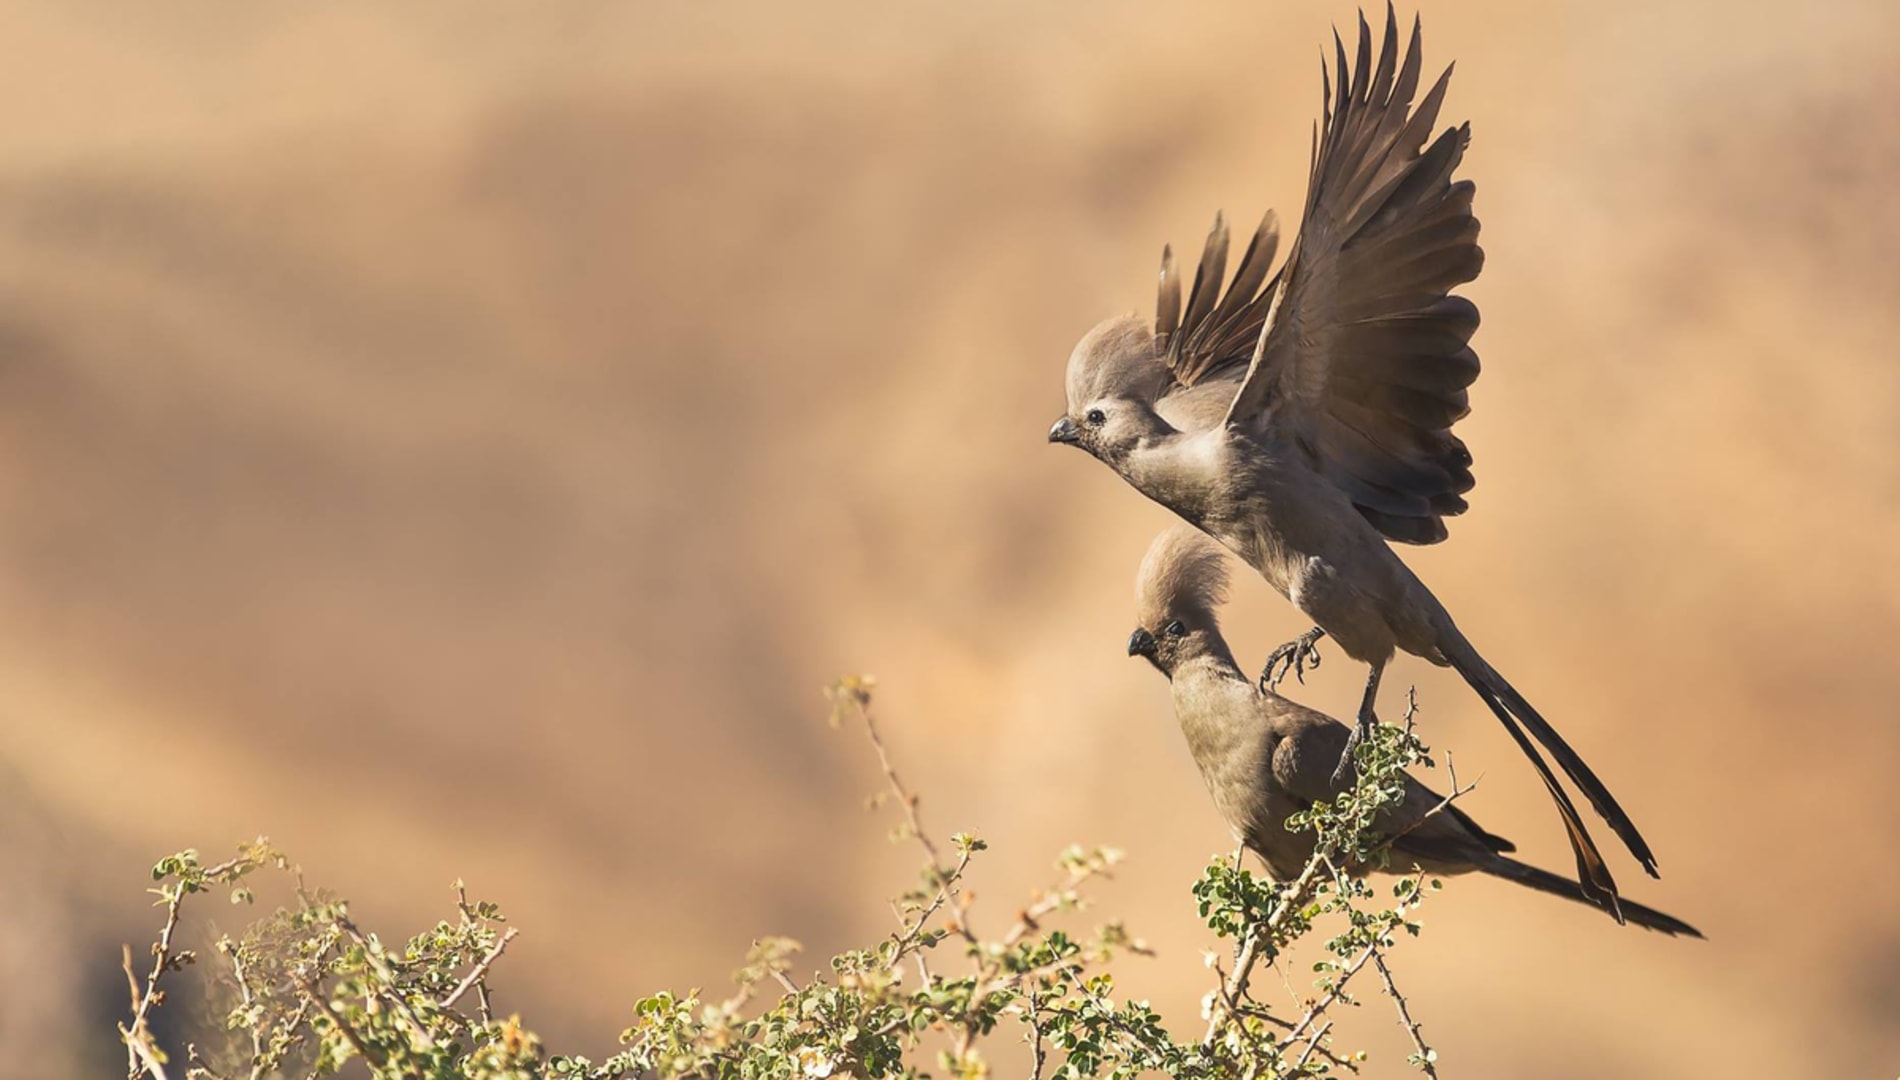 The Ultimate Guide to Birdwatching in Namibia